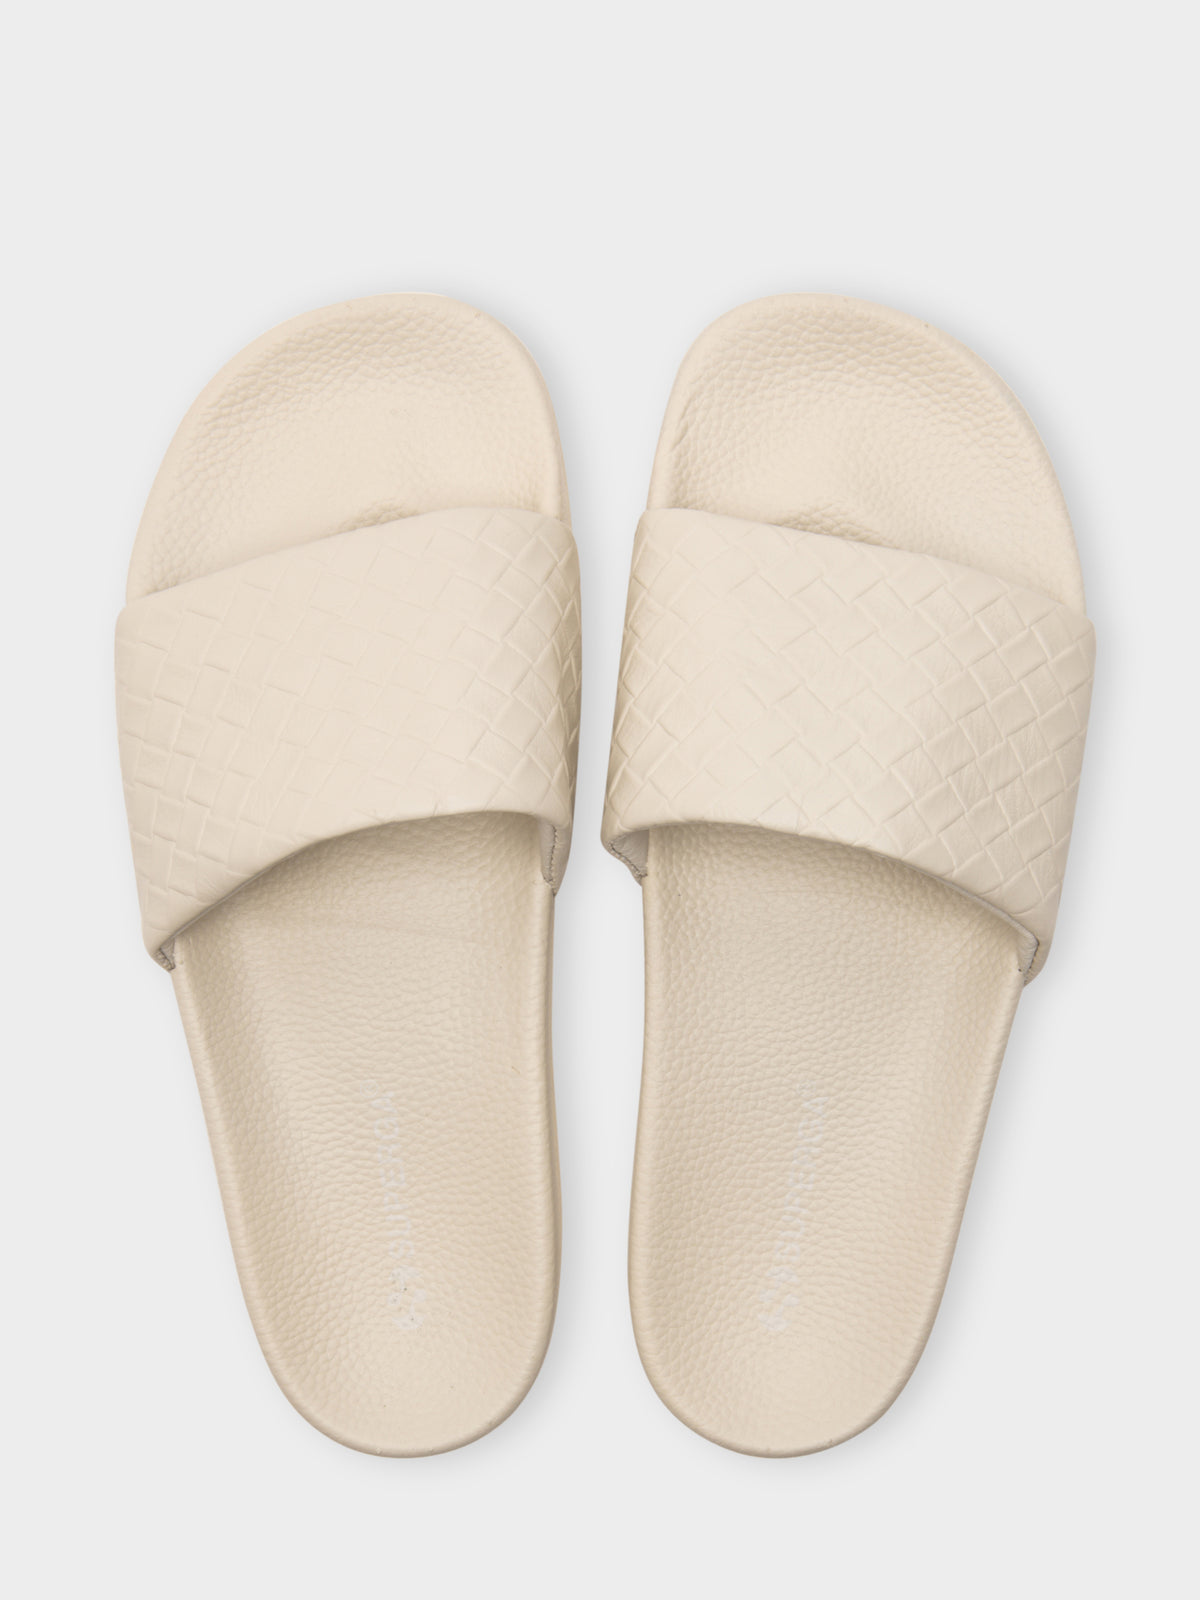 Womens 1908 Woven Leather Slides in Off White